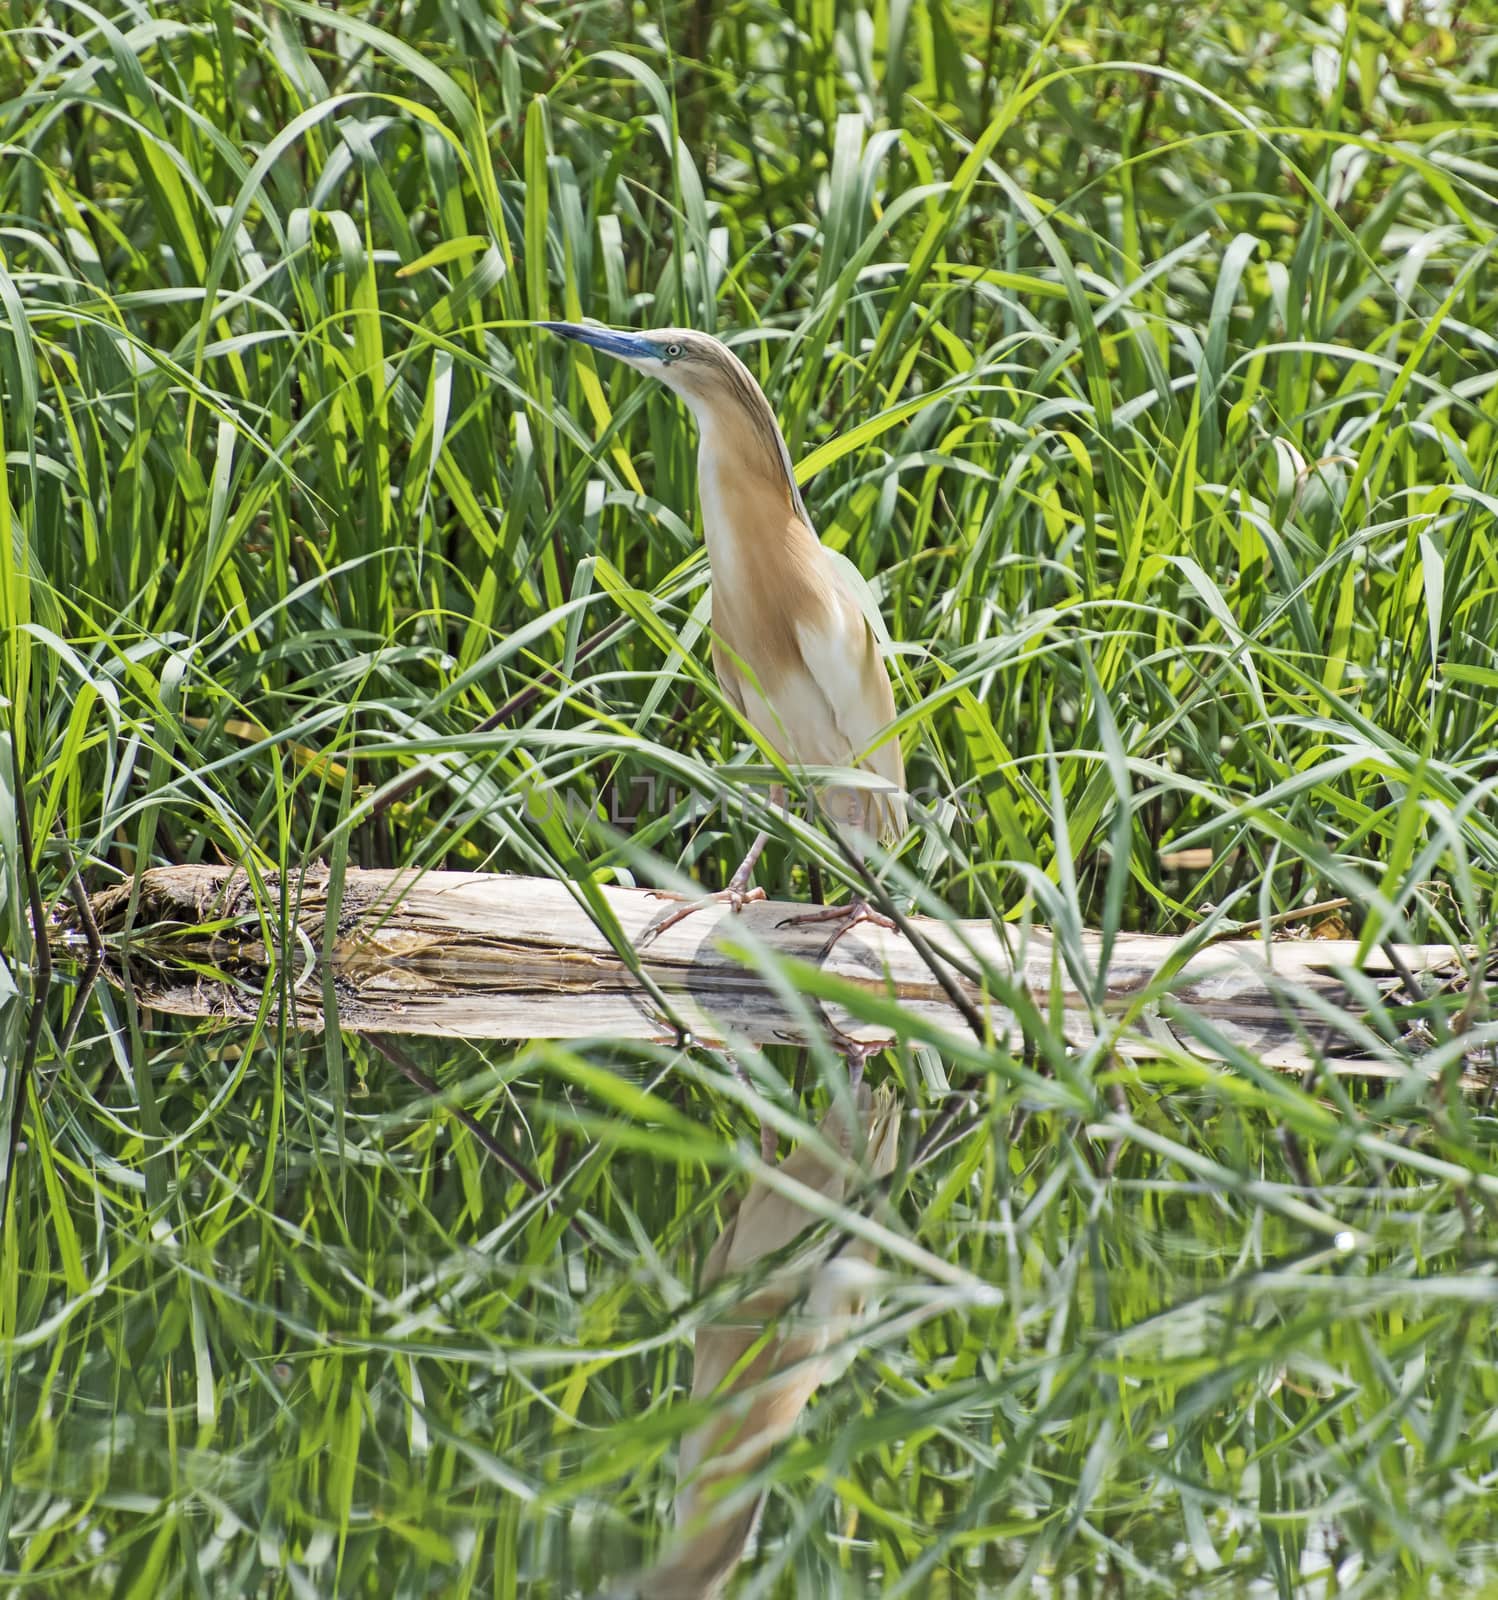 Squacco heron ardeola ralloides perched on a wooden log in grass reeds with reflection over river water